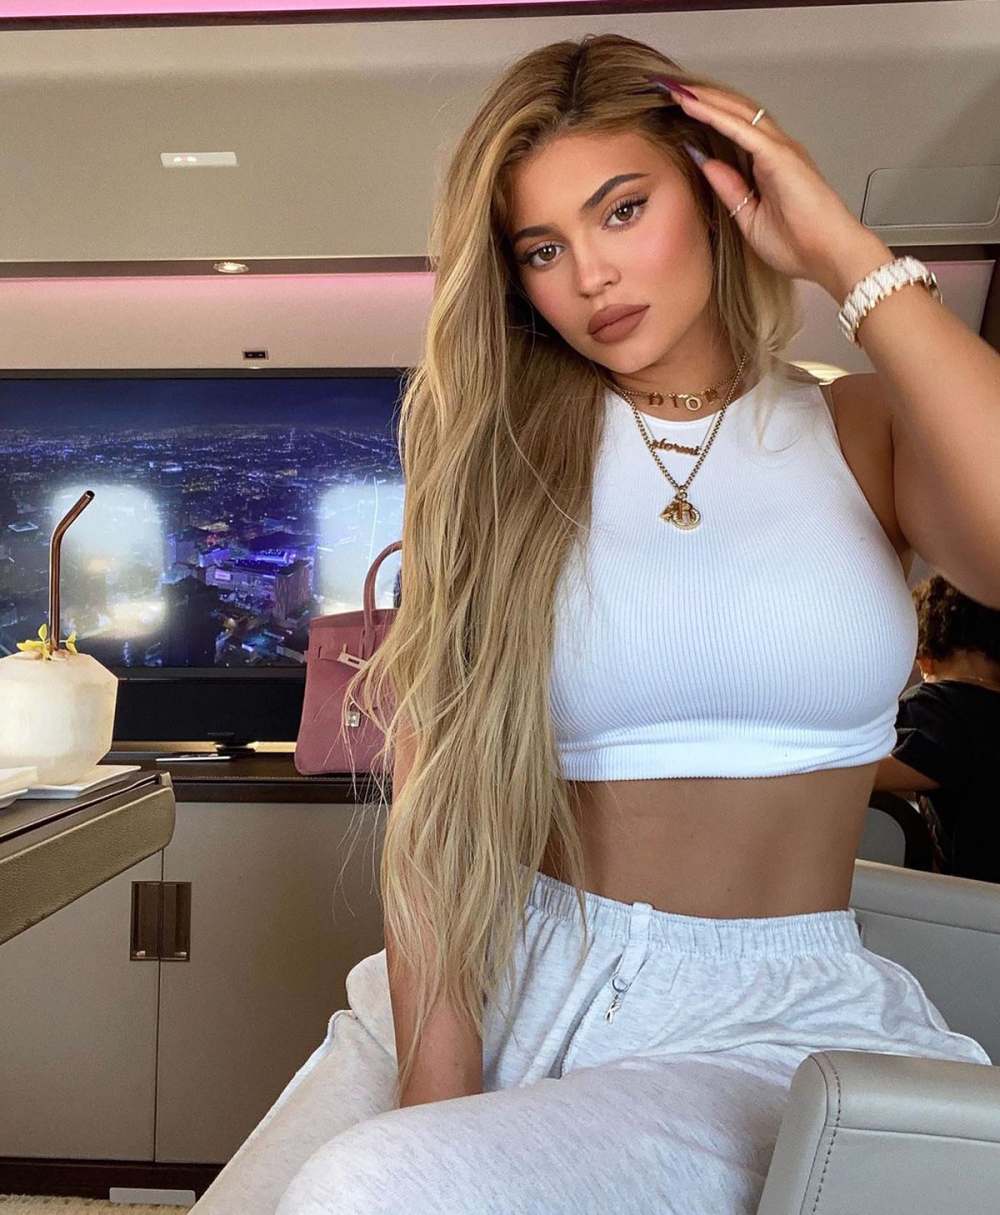 Fans Are Not Happy With Kylie Jenner, This Is Why